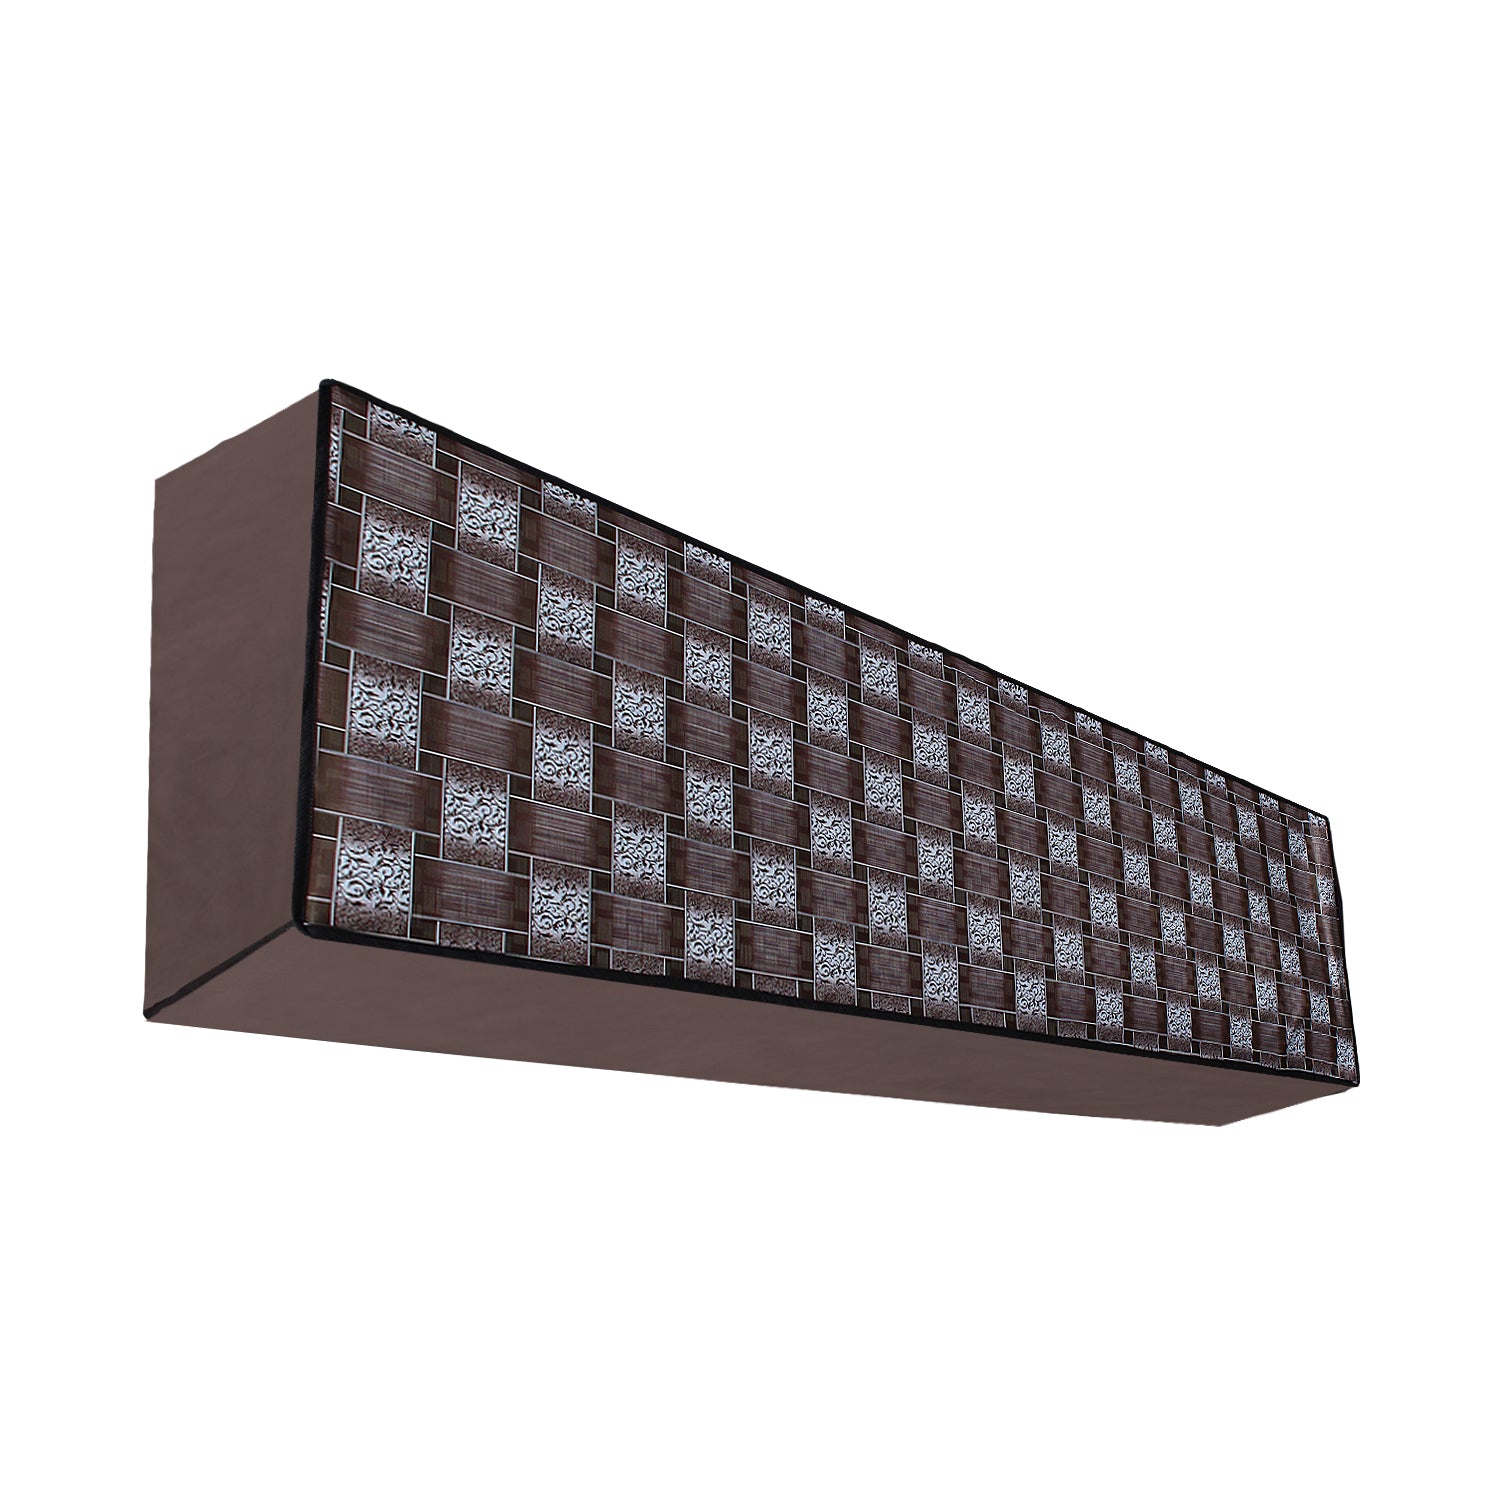 Waterproof and Dustproof Split Indoor AC Cover, SA41 - Dream Care Furnishings Private Limited